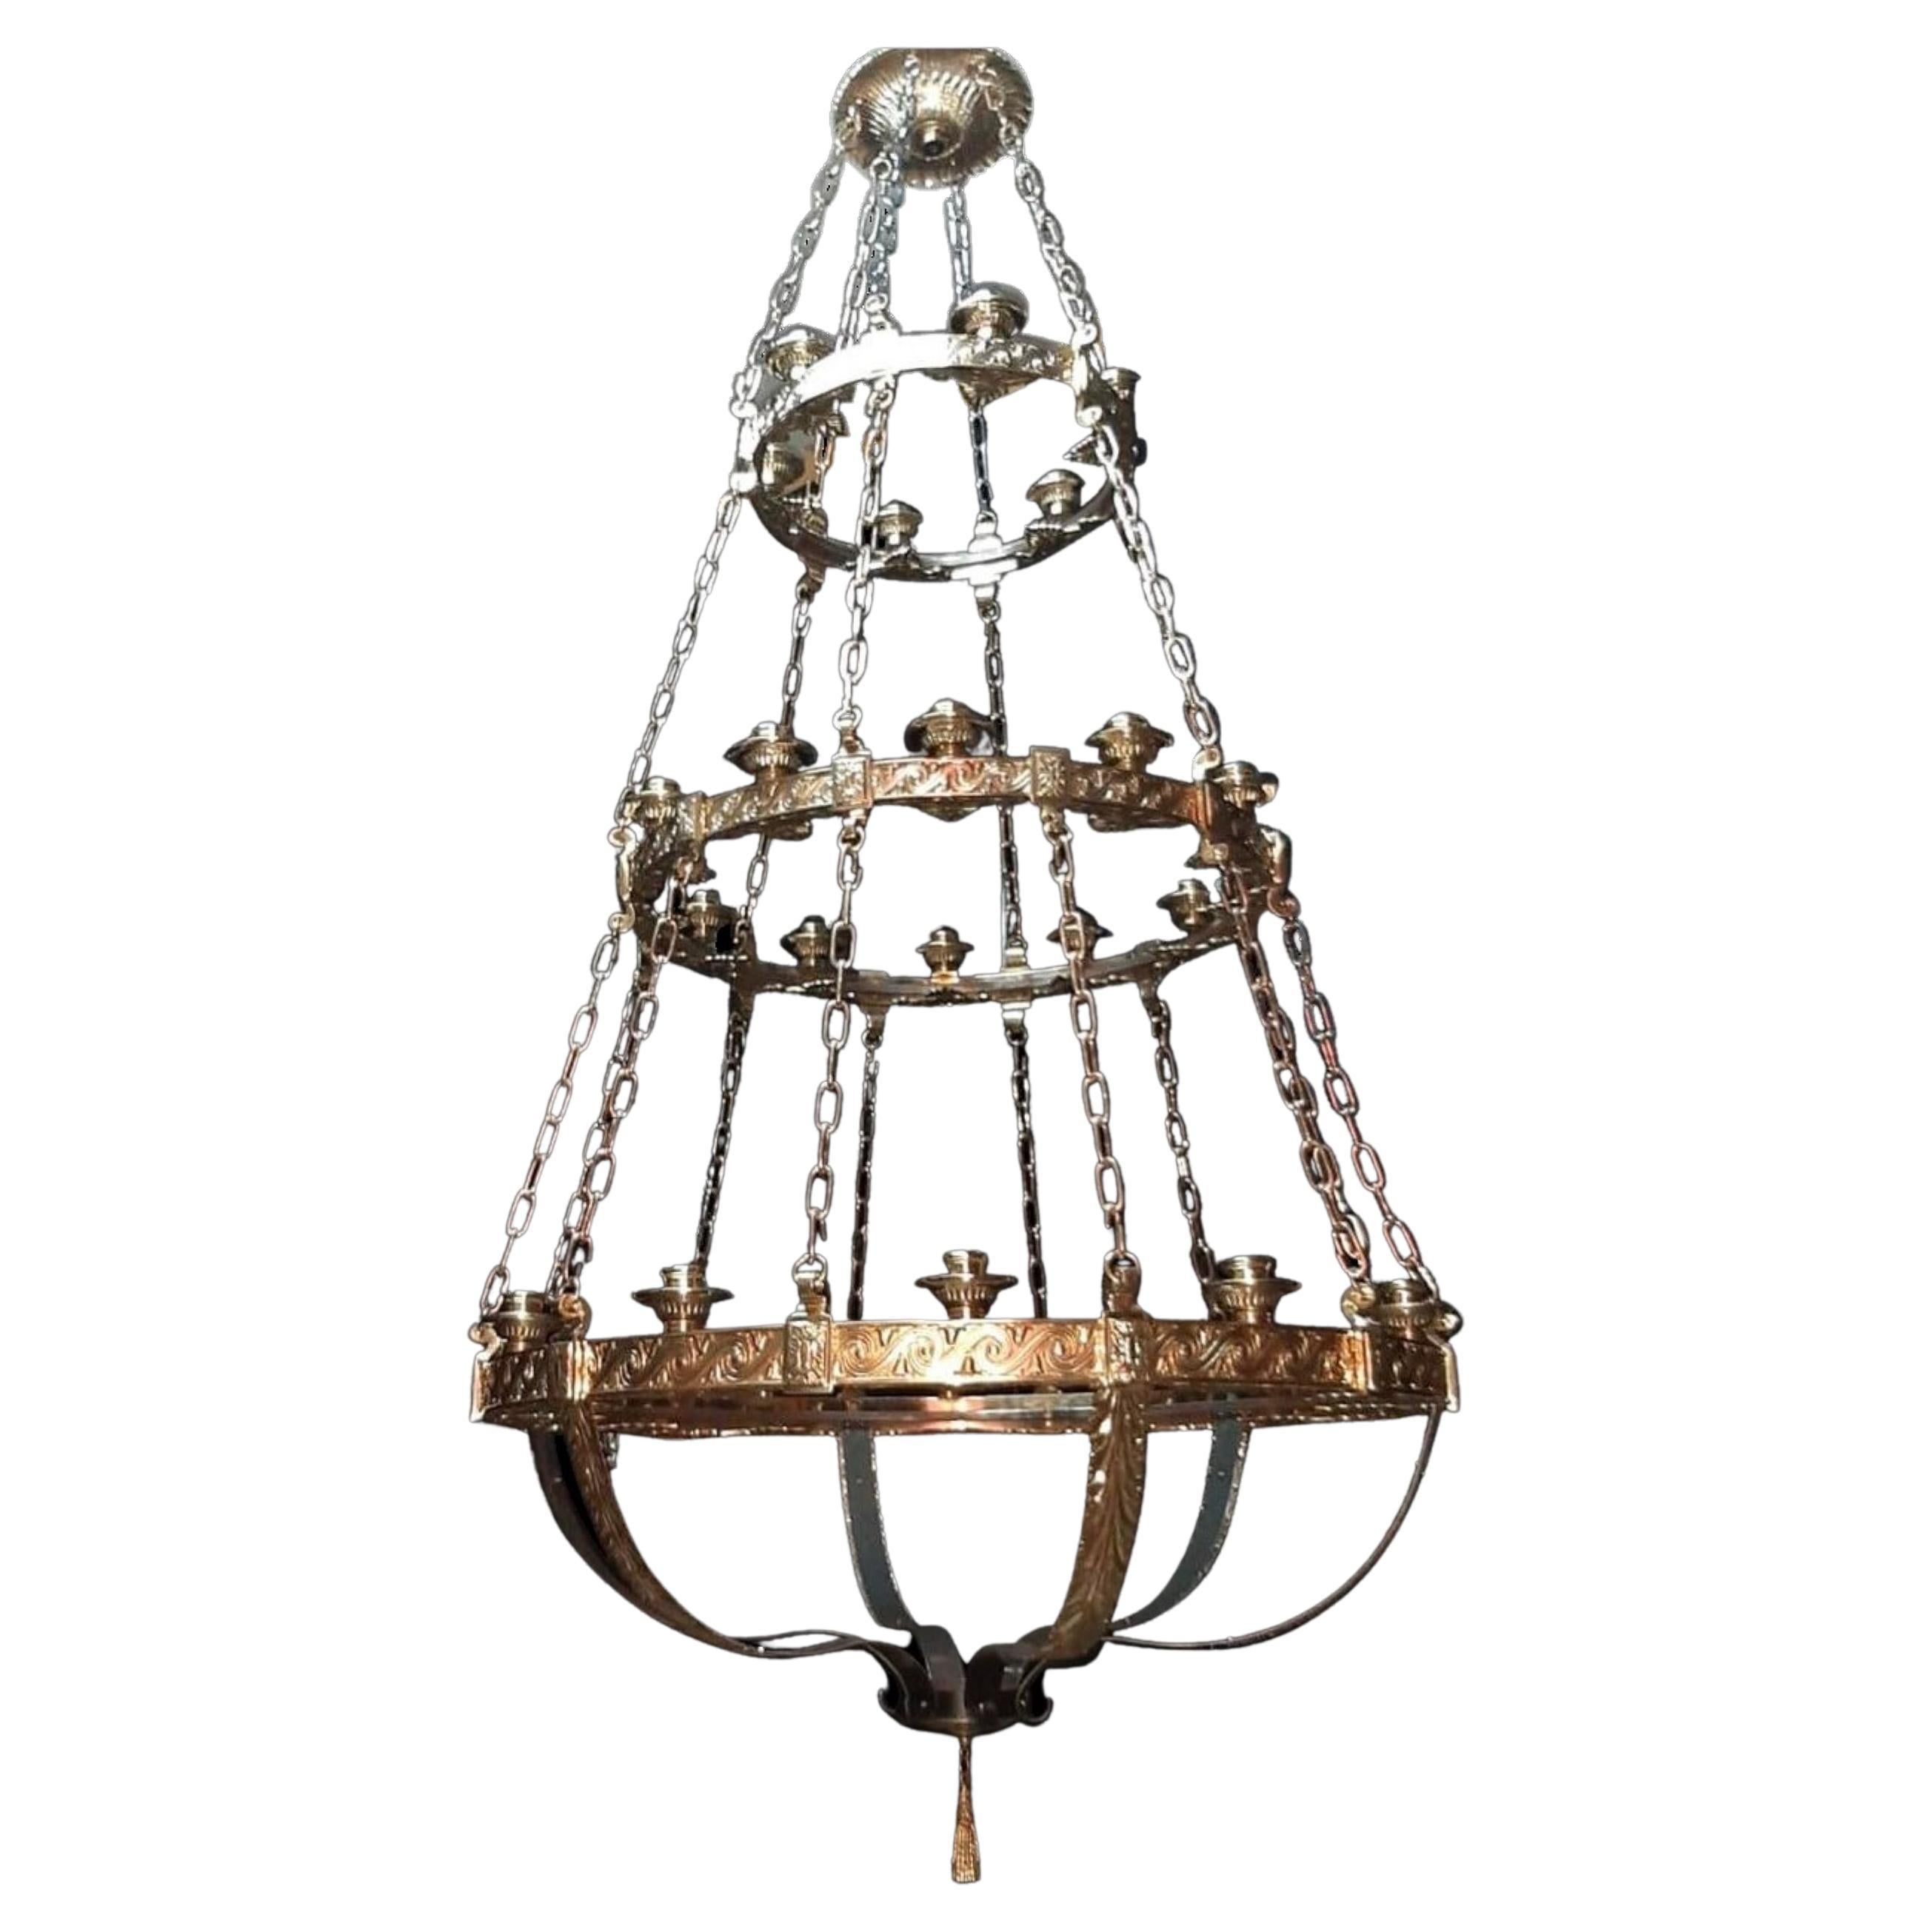 1900's Large Caldwell Gilt Bronze Neoclassic Chandelier with 30 lights For Sale